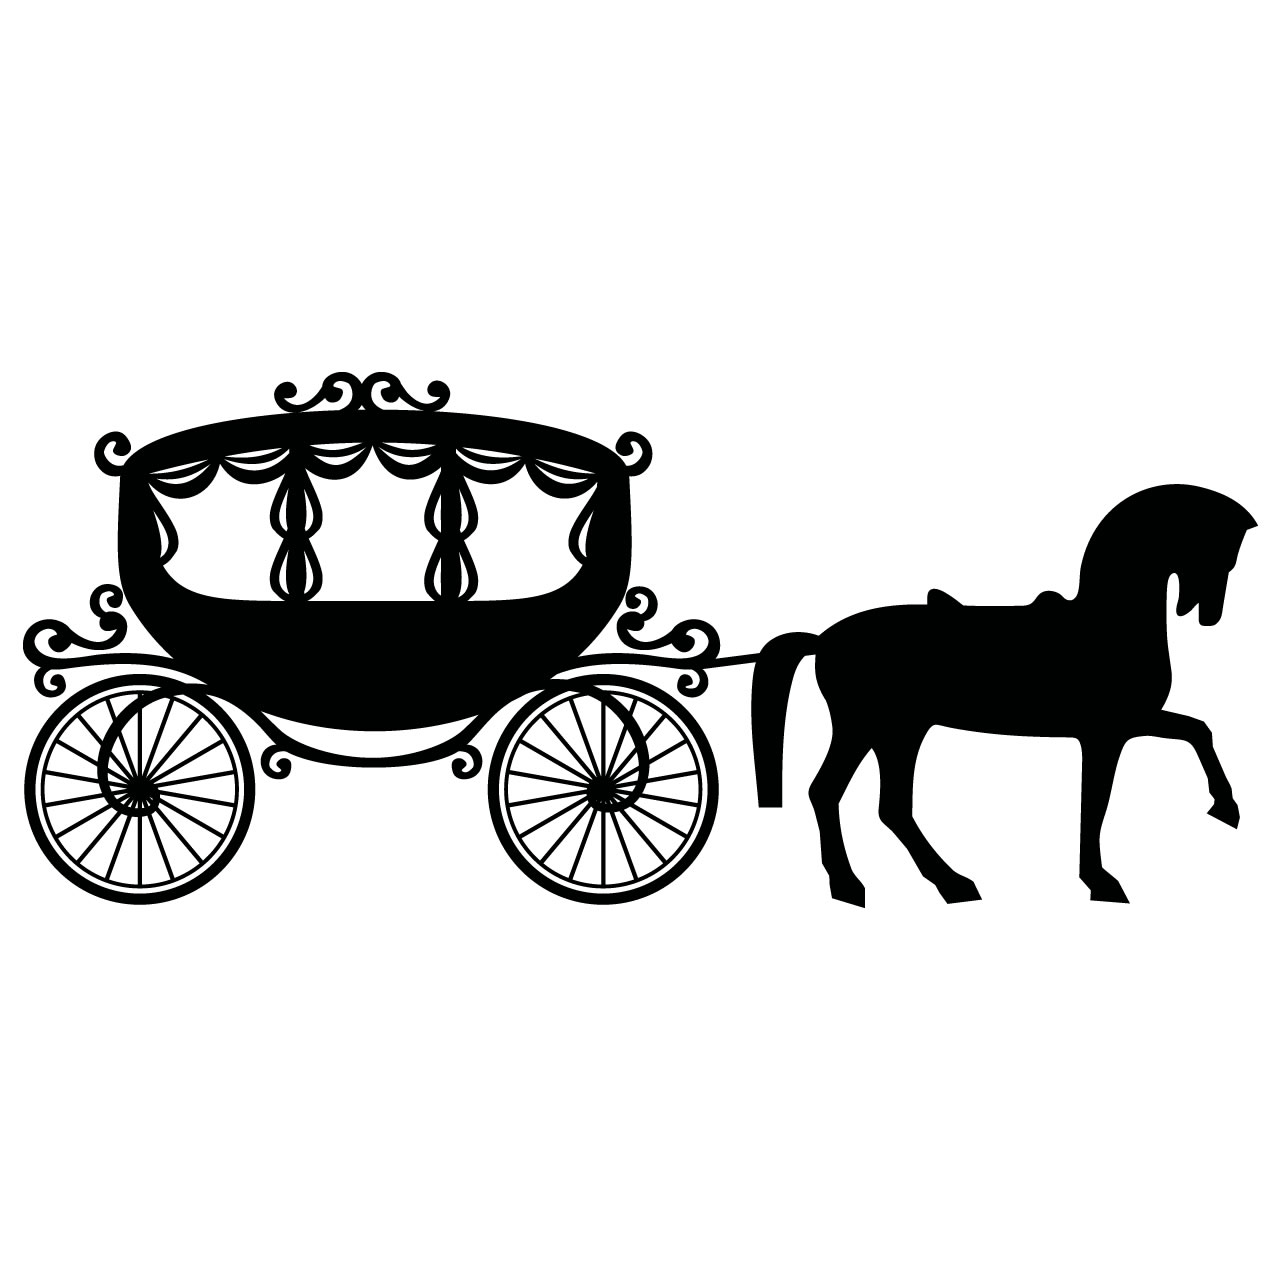 Blue cinderella carriage outline silhouette clipart